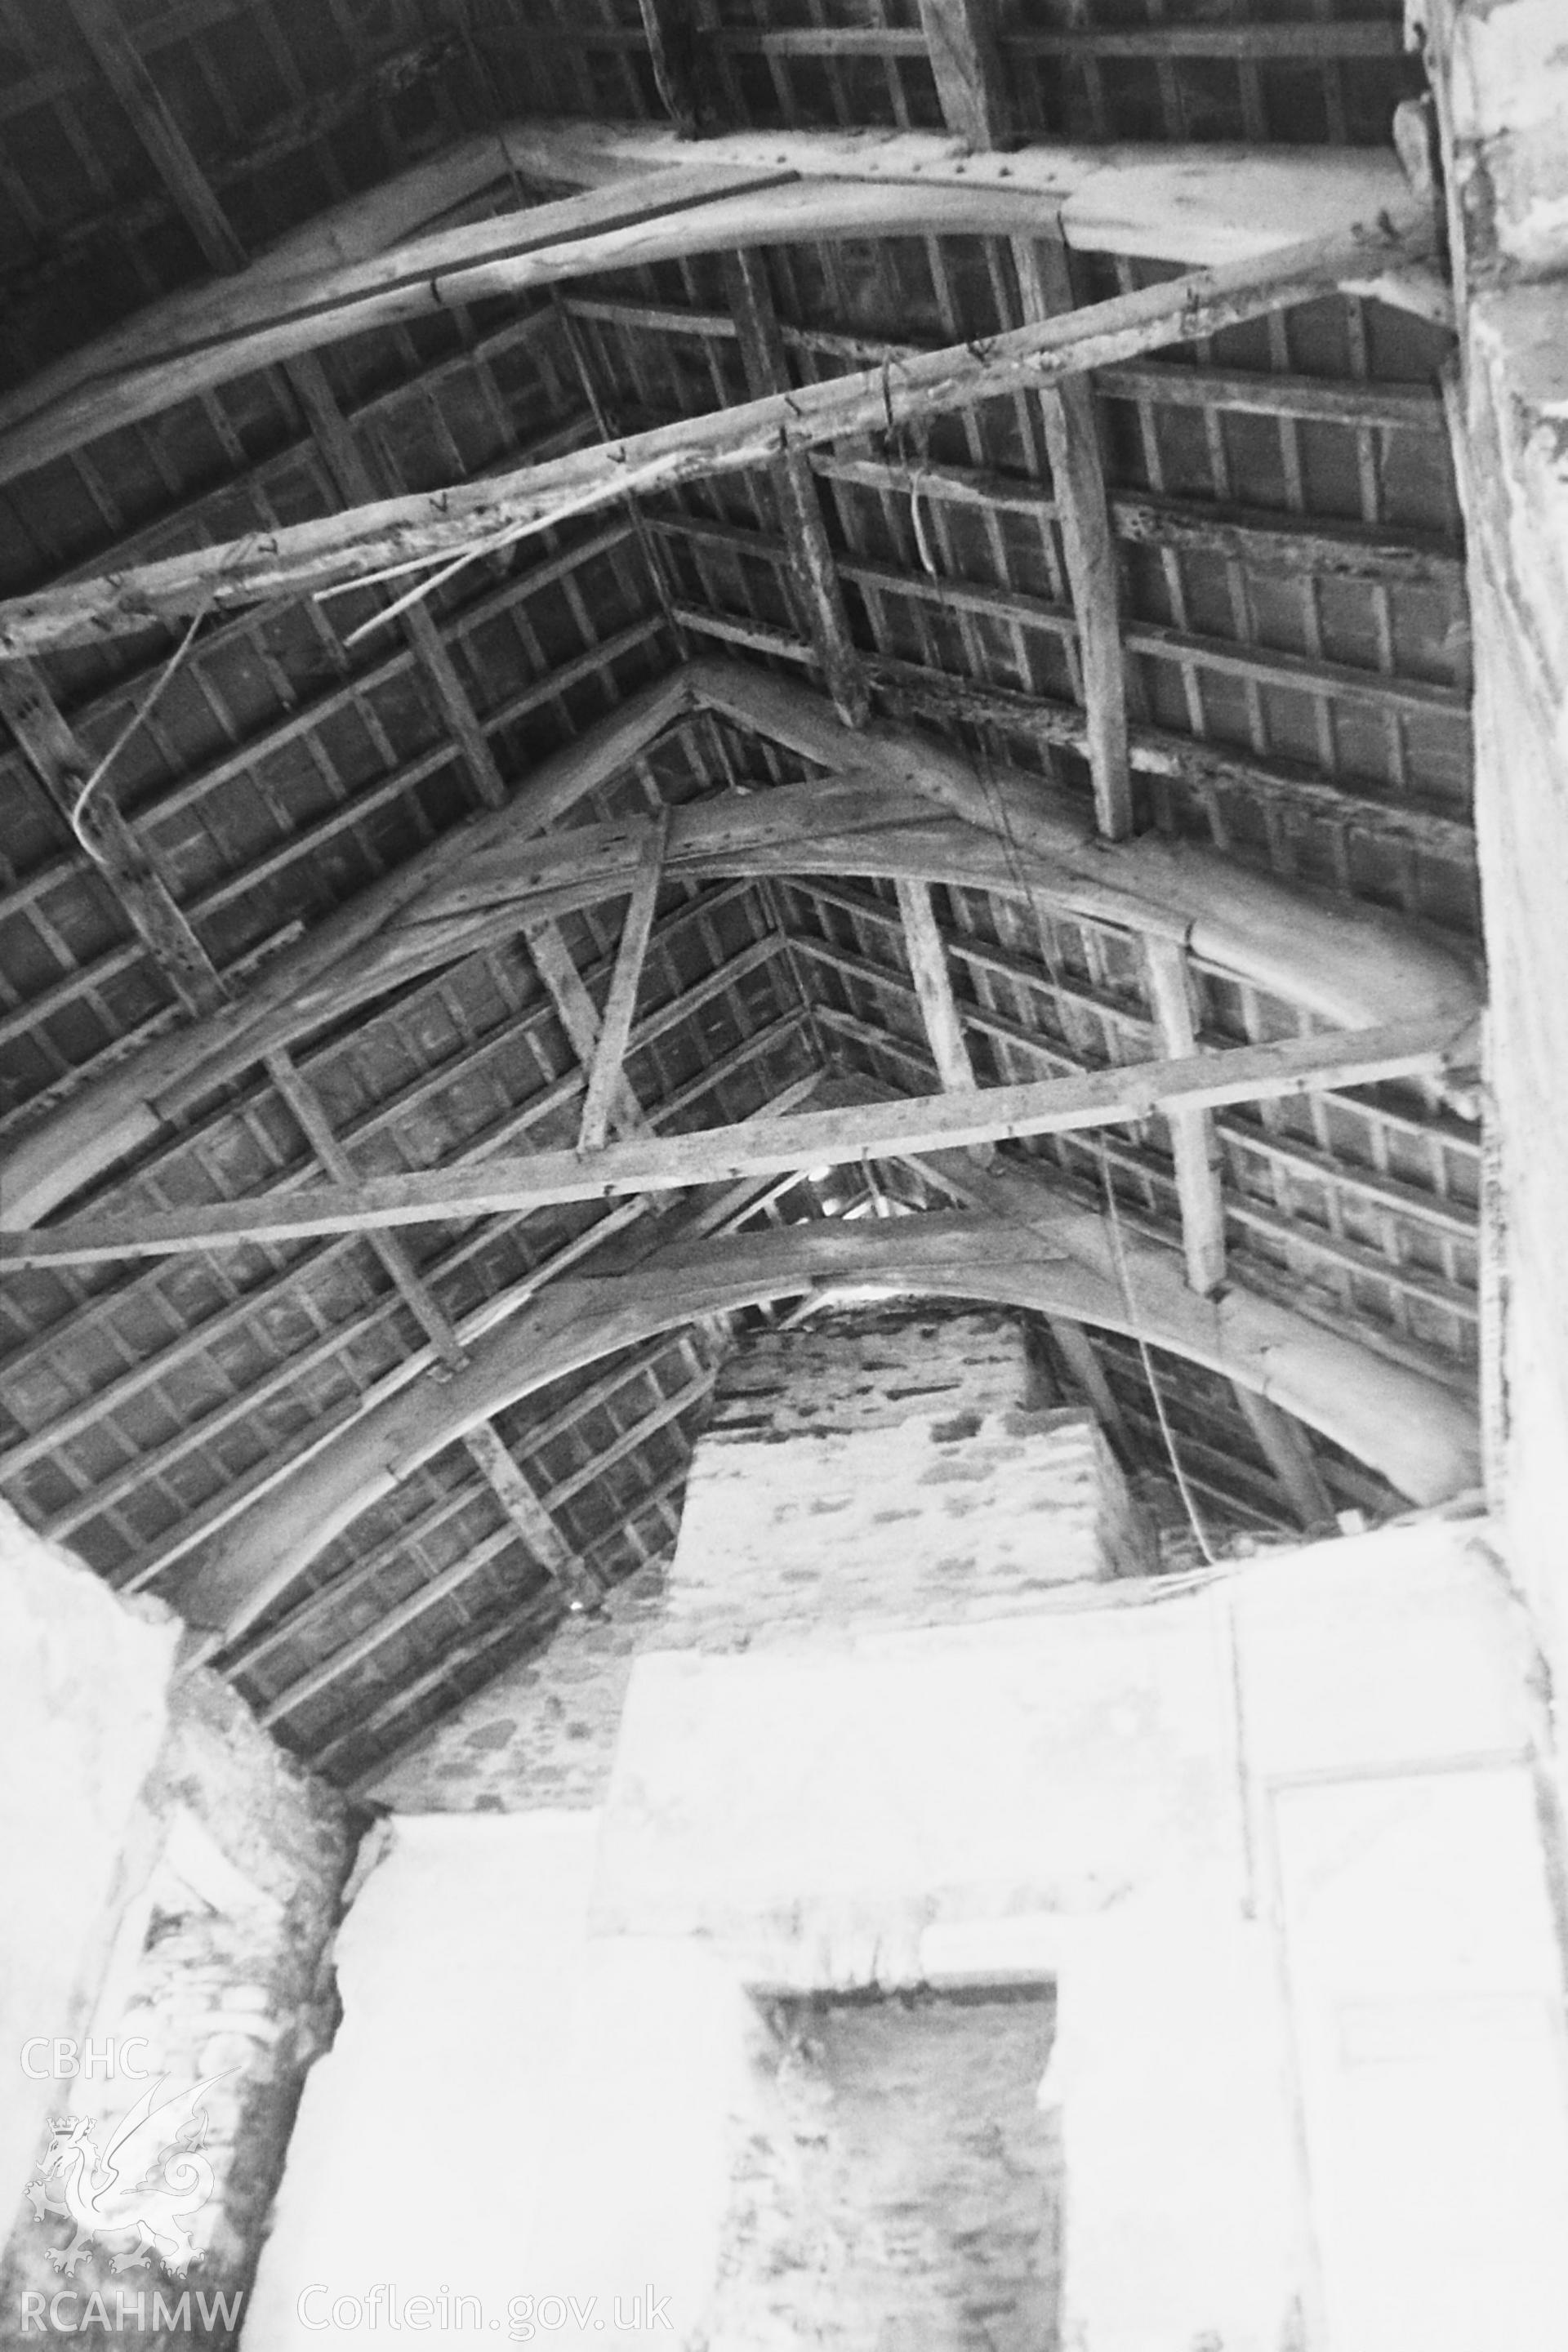 Black and white photo showing interior view of Lletty'r Ychen, taken by Paul R. Davis, 1998.